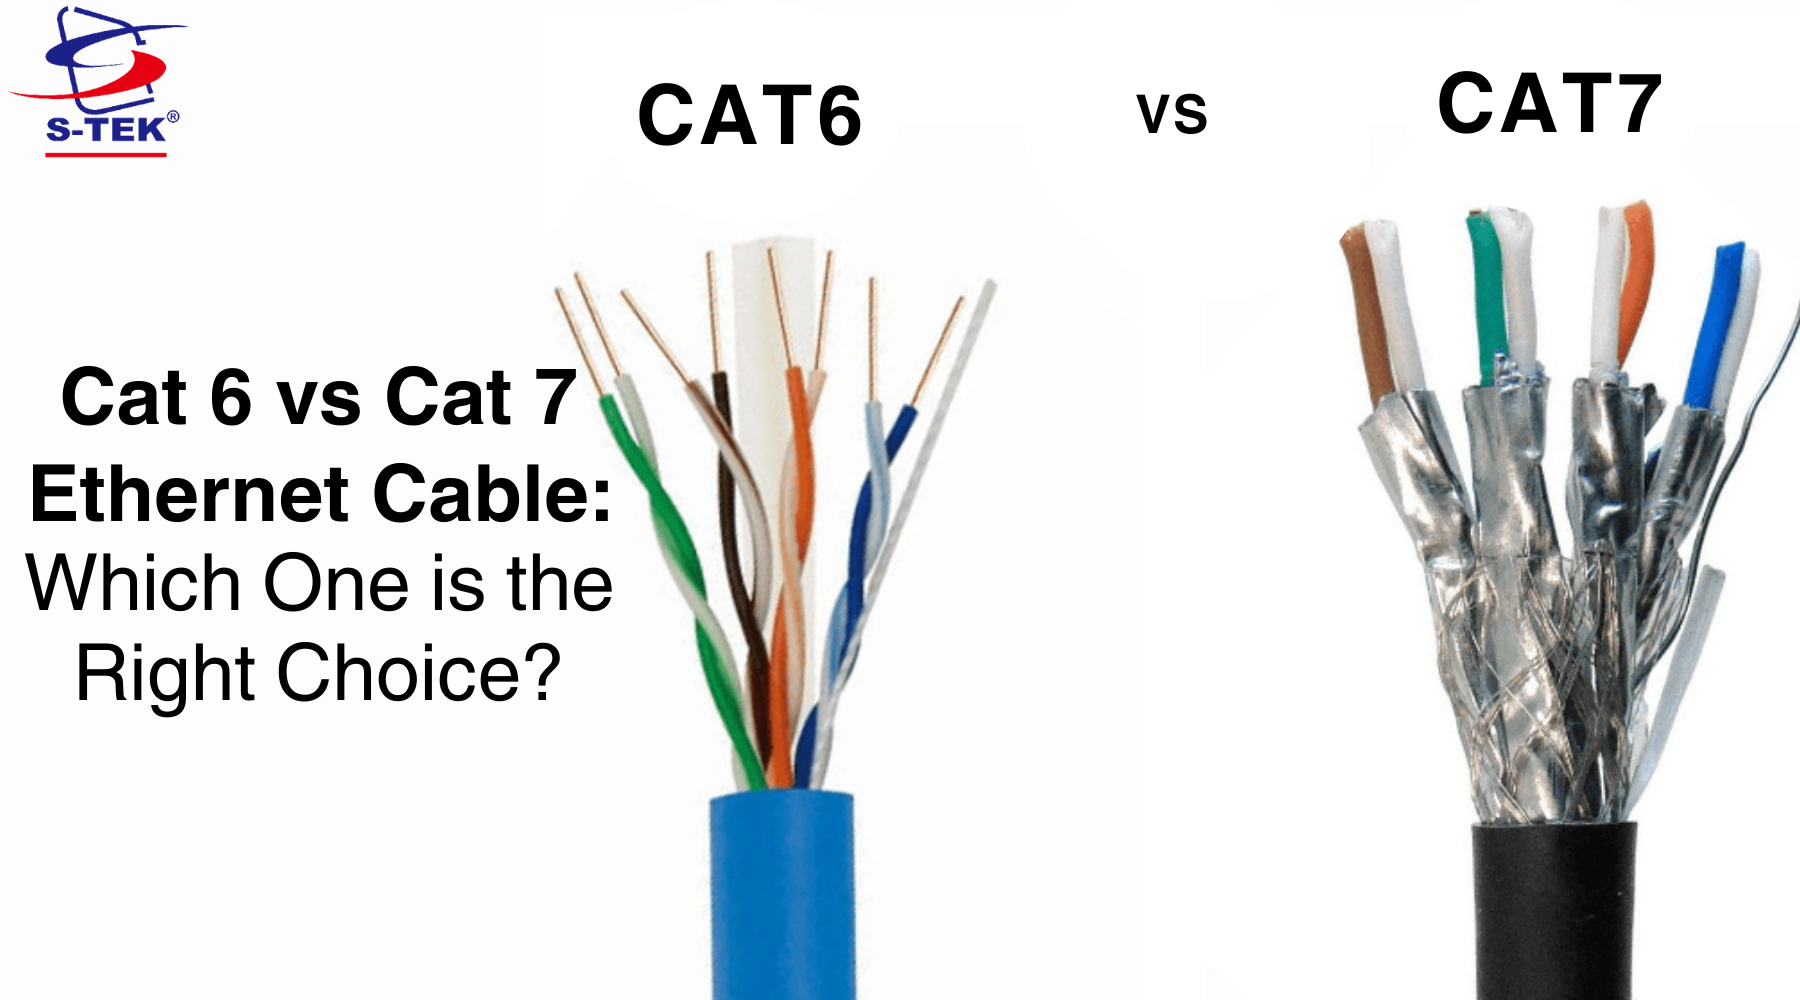 Cat 6 vs Cat 7 Ethernet Cable: Which One is the Right Choice?